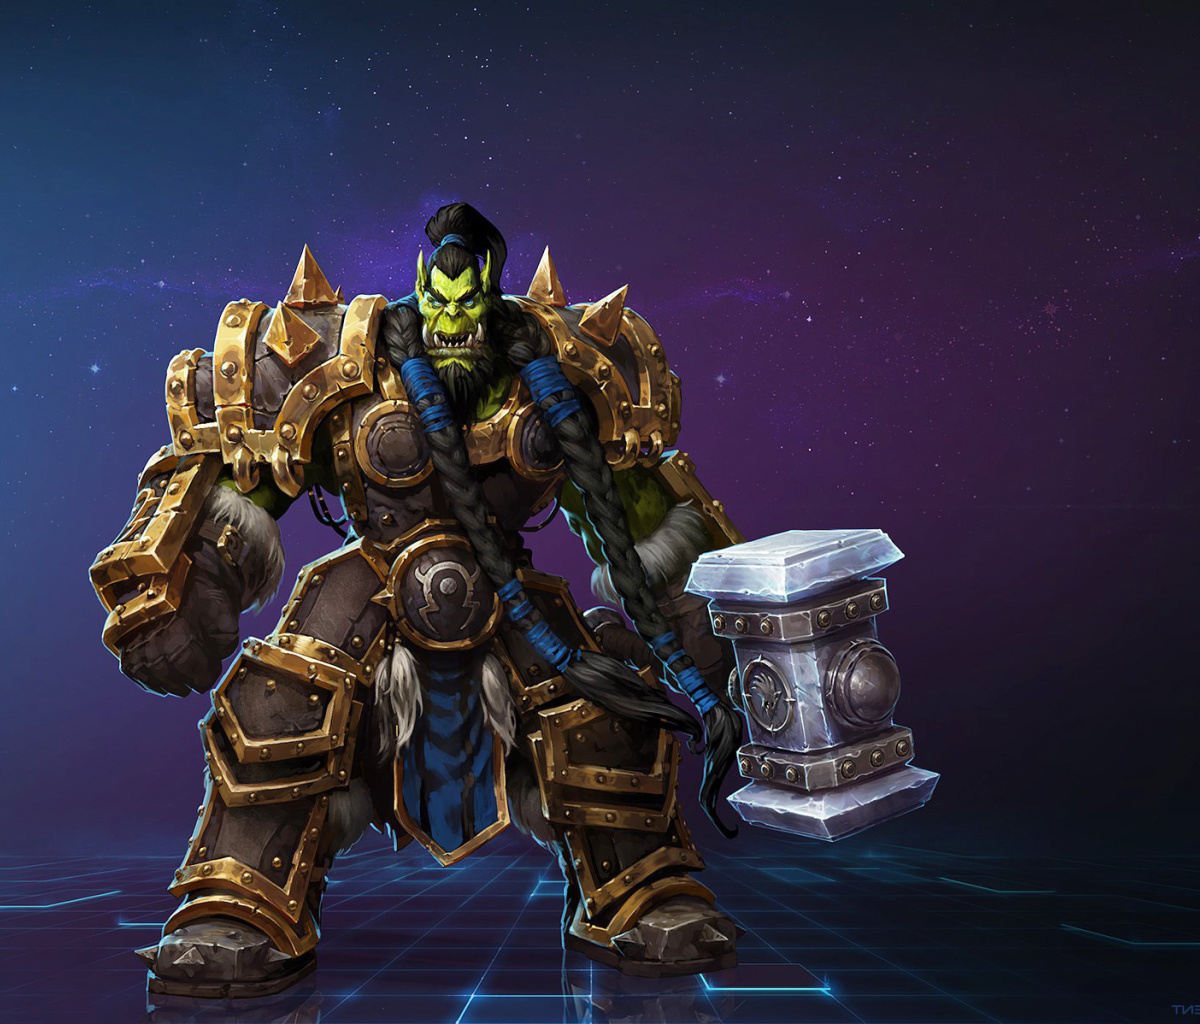 Heroes of the Storm multiplayer online battle arena video game screenshot #1 1200x1024